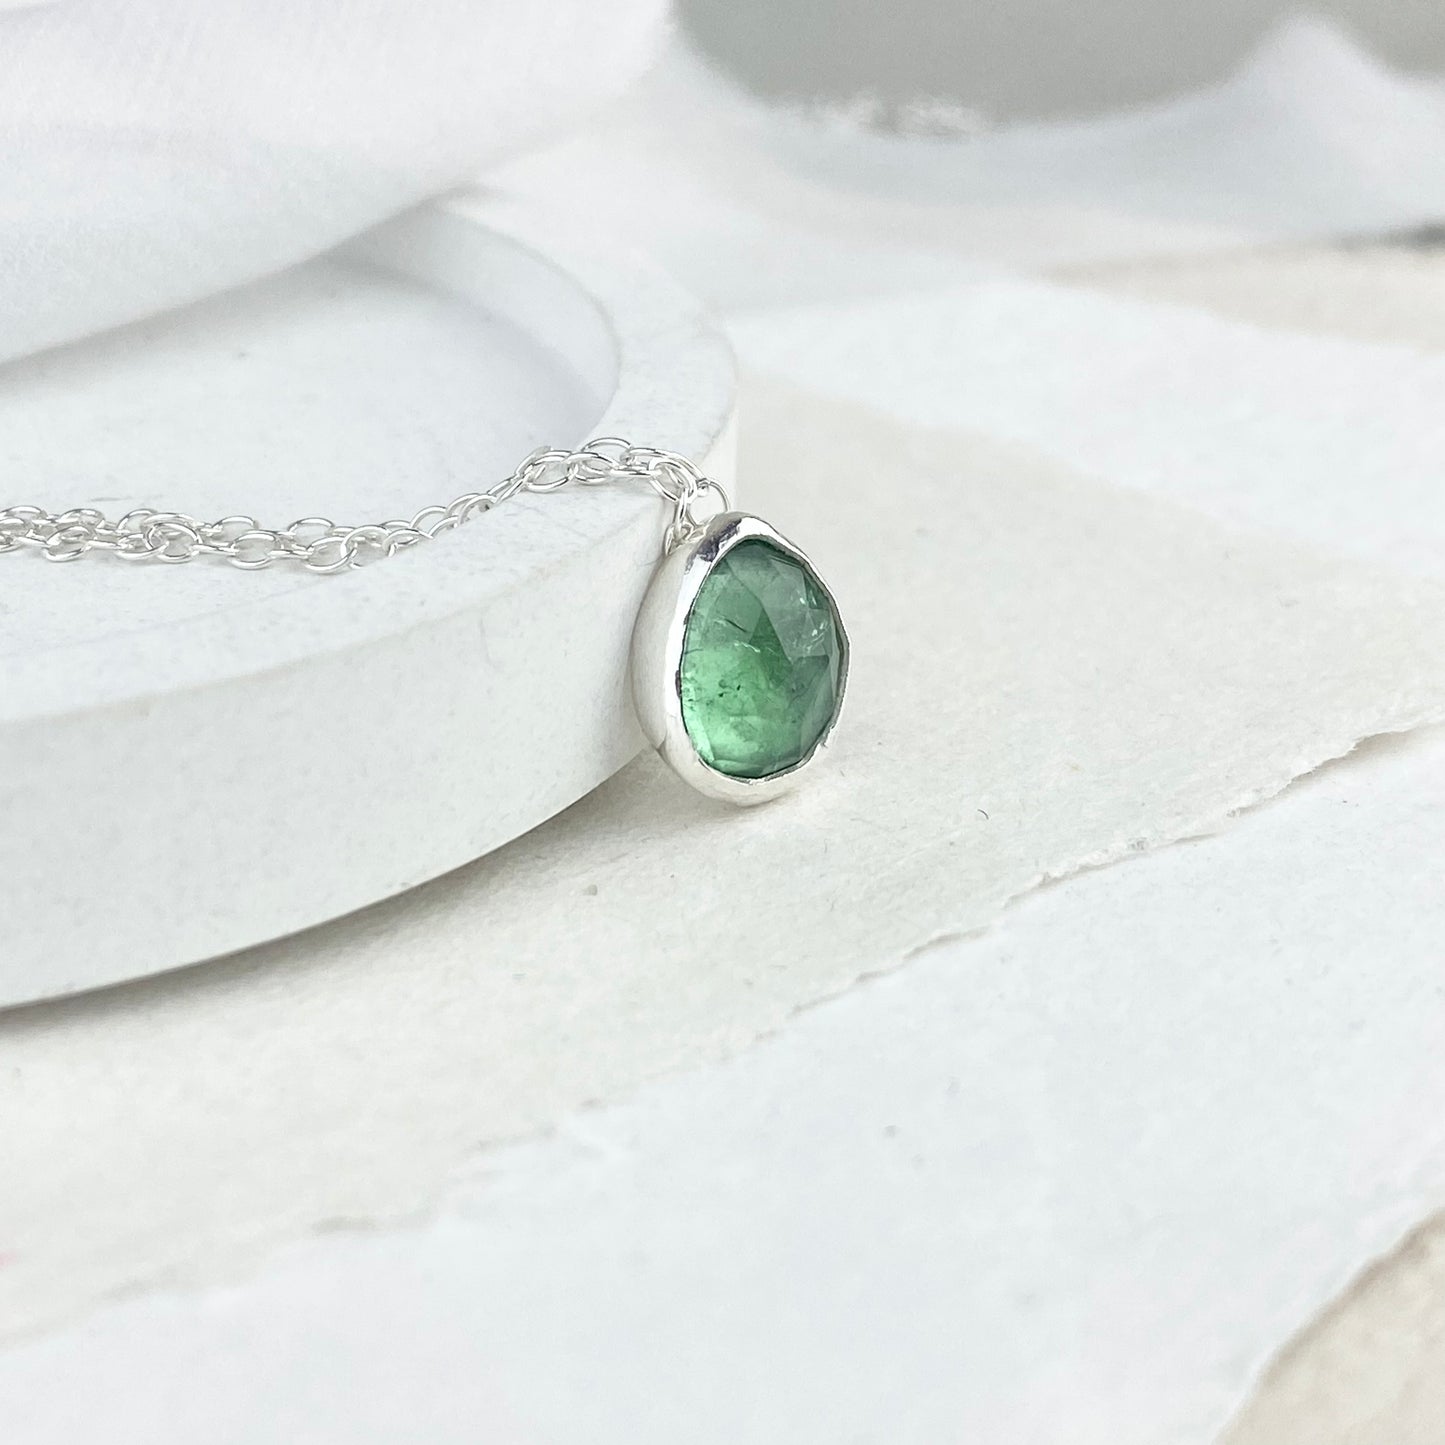 Silver and green tourmaline pendant